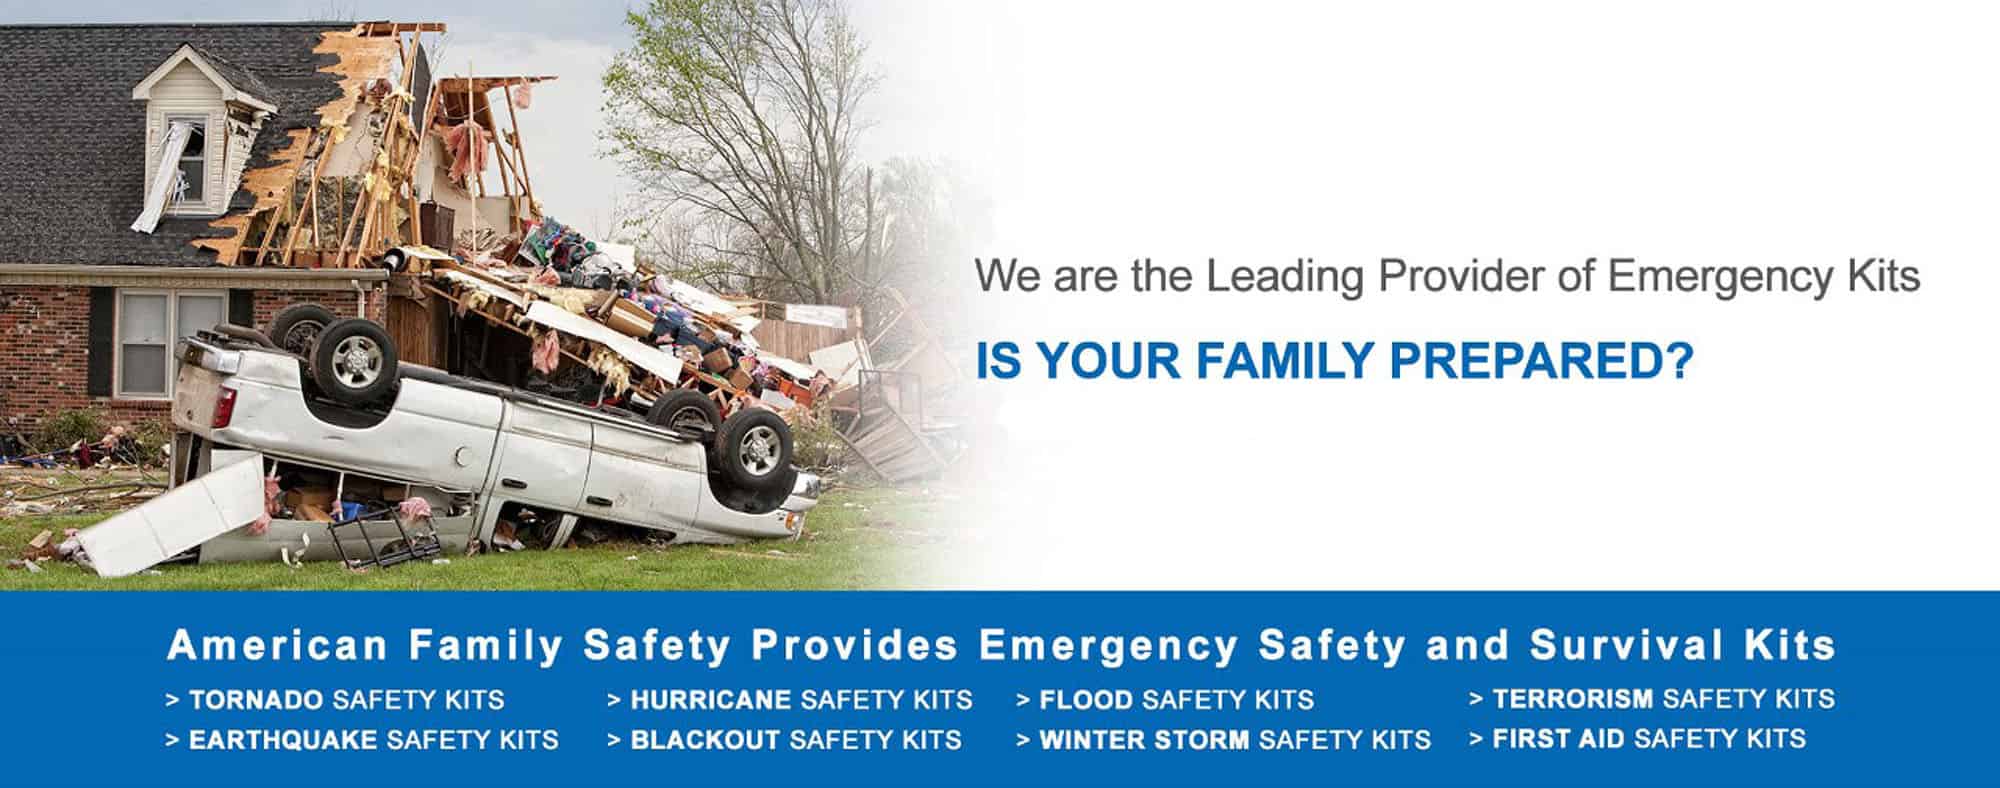 American Family Safety is a leading provider of Emergency Kits